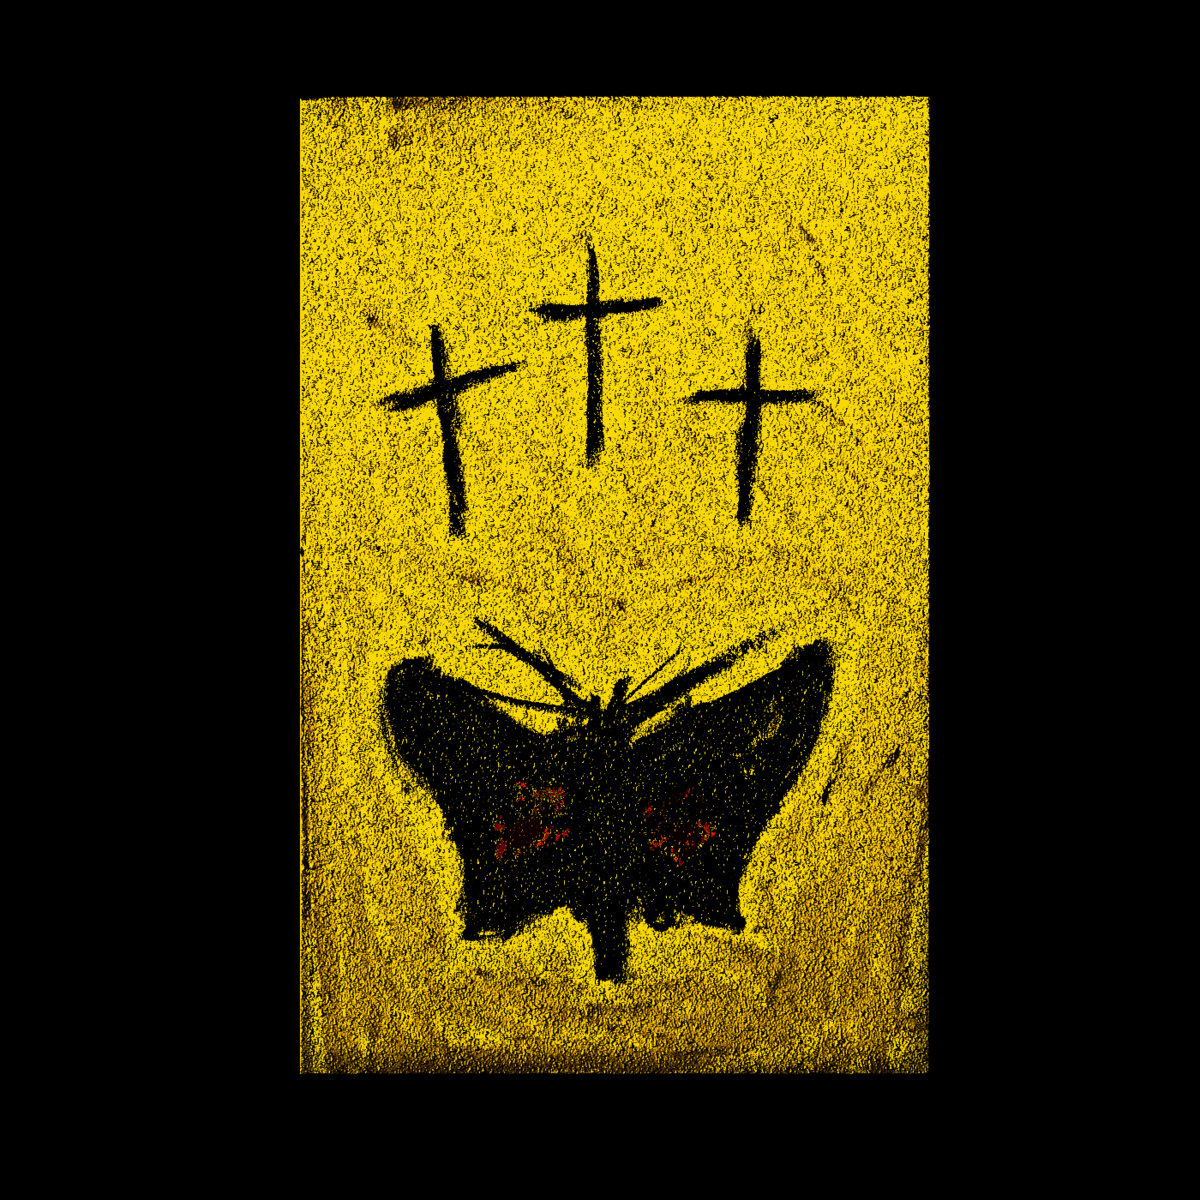 artwork for Books of Moths by Jesus is the path to heaven featuring three black crosses and a moth scratched into a yellow background